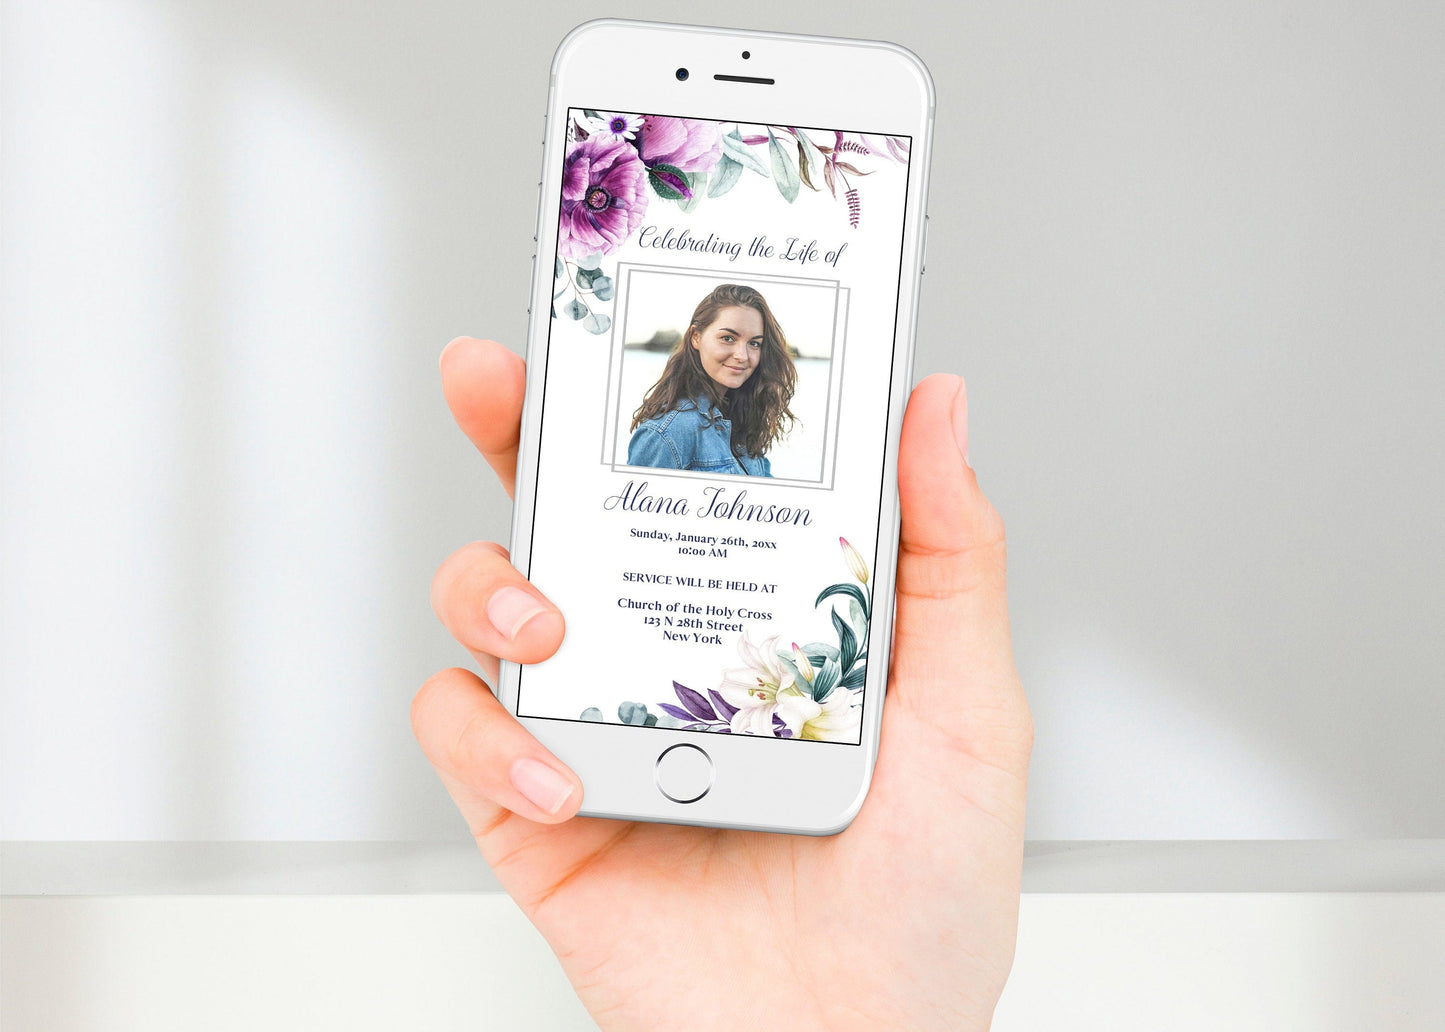 Elegant purple flowers adorn this funeral announcement template on a phone